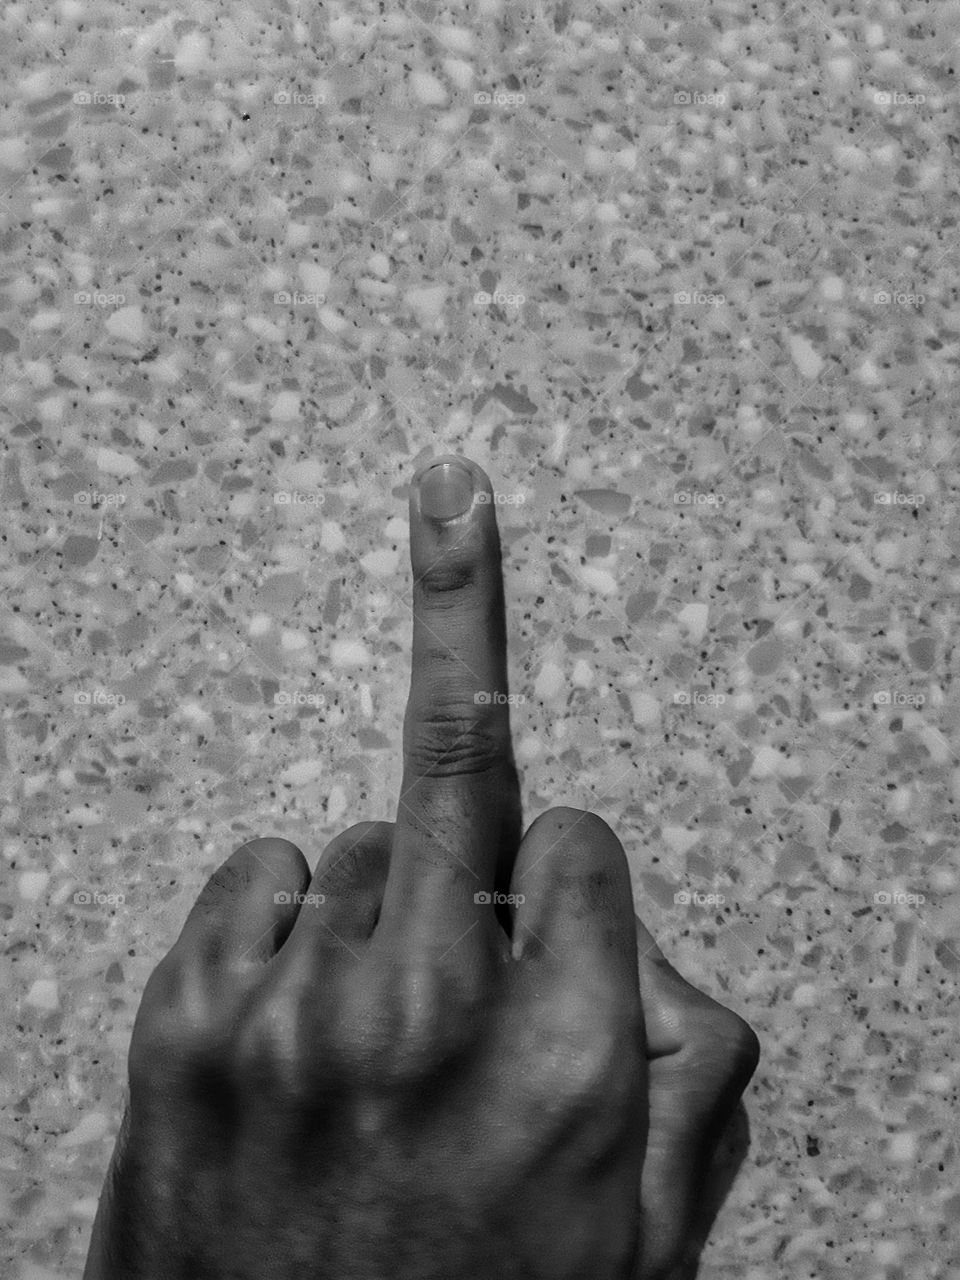 A middle finger is used as a symbol of rudeness. It means "fuck you!"